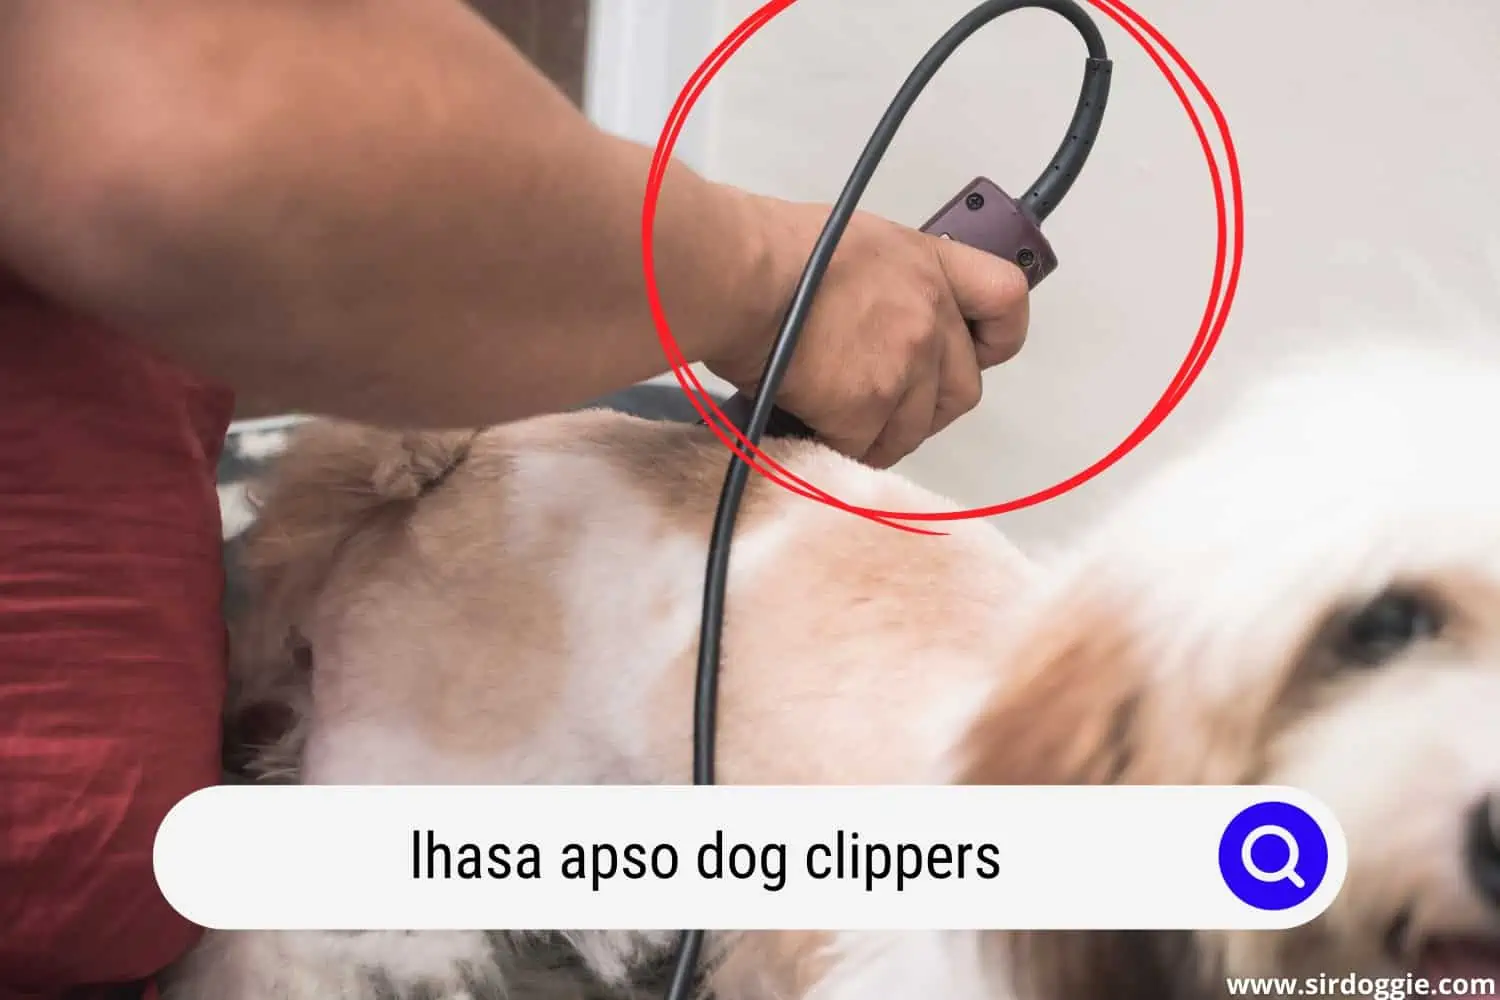 A pet groomer uses a hair clipper to trim the fur of a young Lhasa Apso puppy